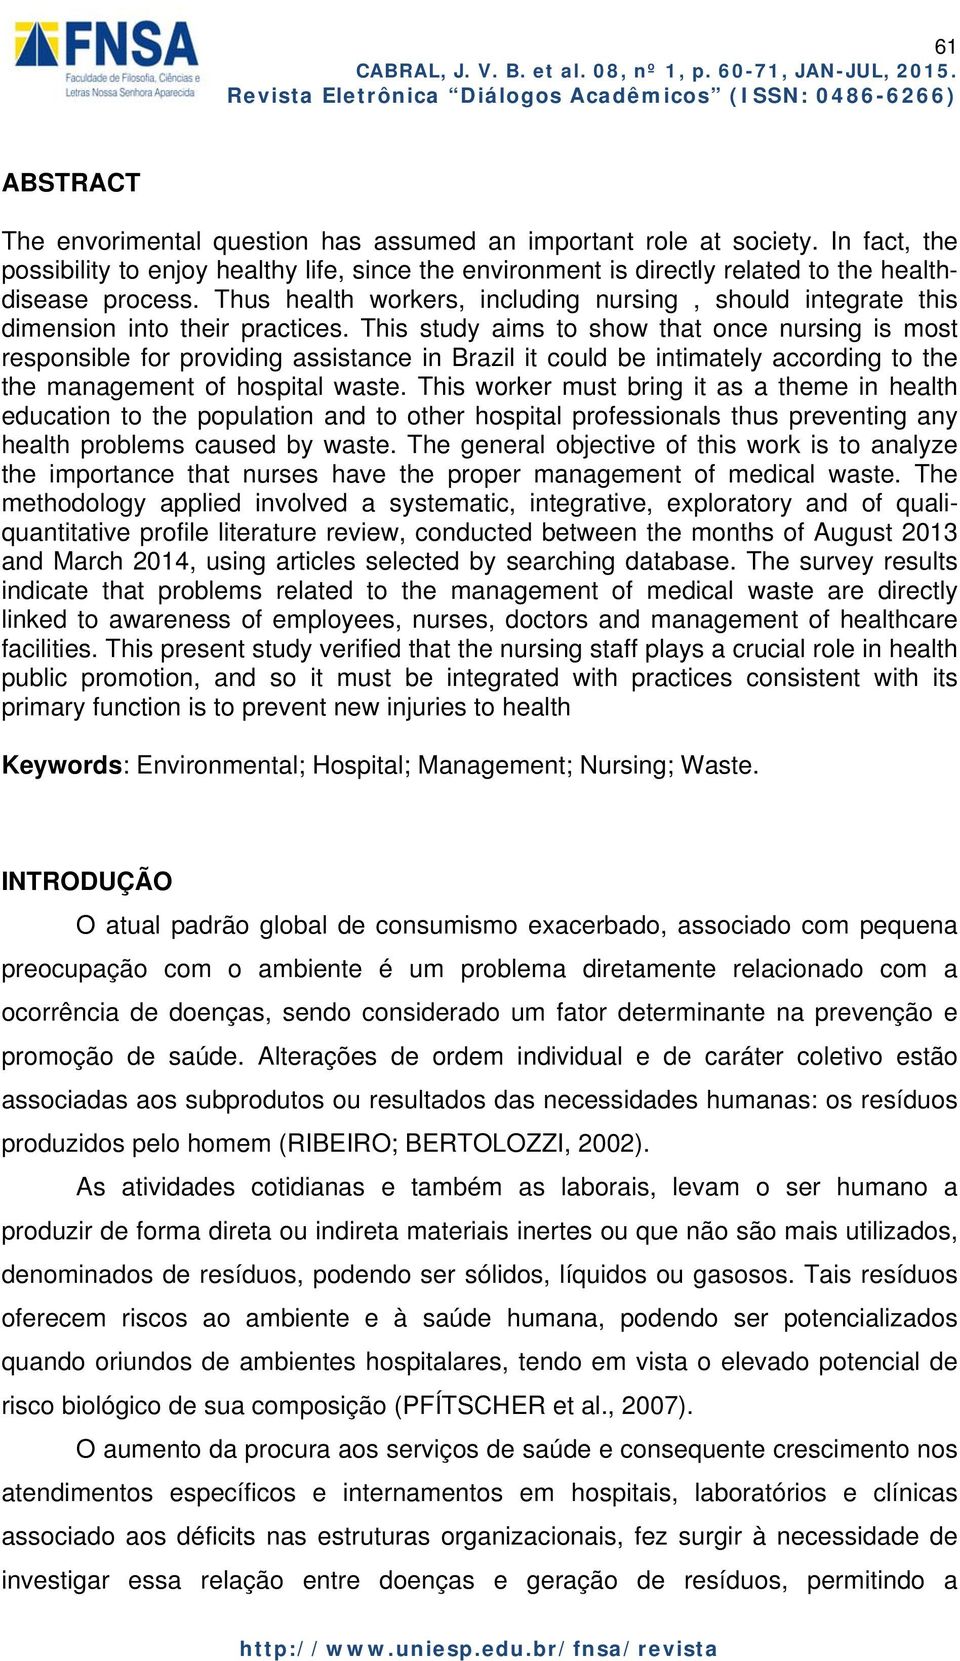 This study aims to show that once nursing is most responsible for providing assistance in Brazil it could be intimately according to the the management of hospital waste.